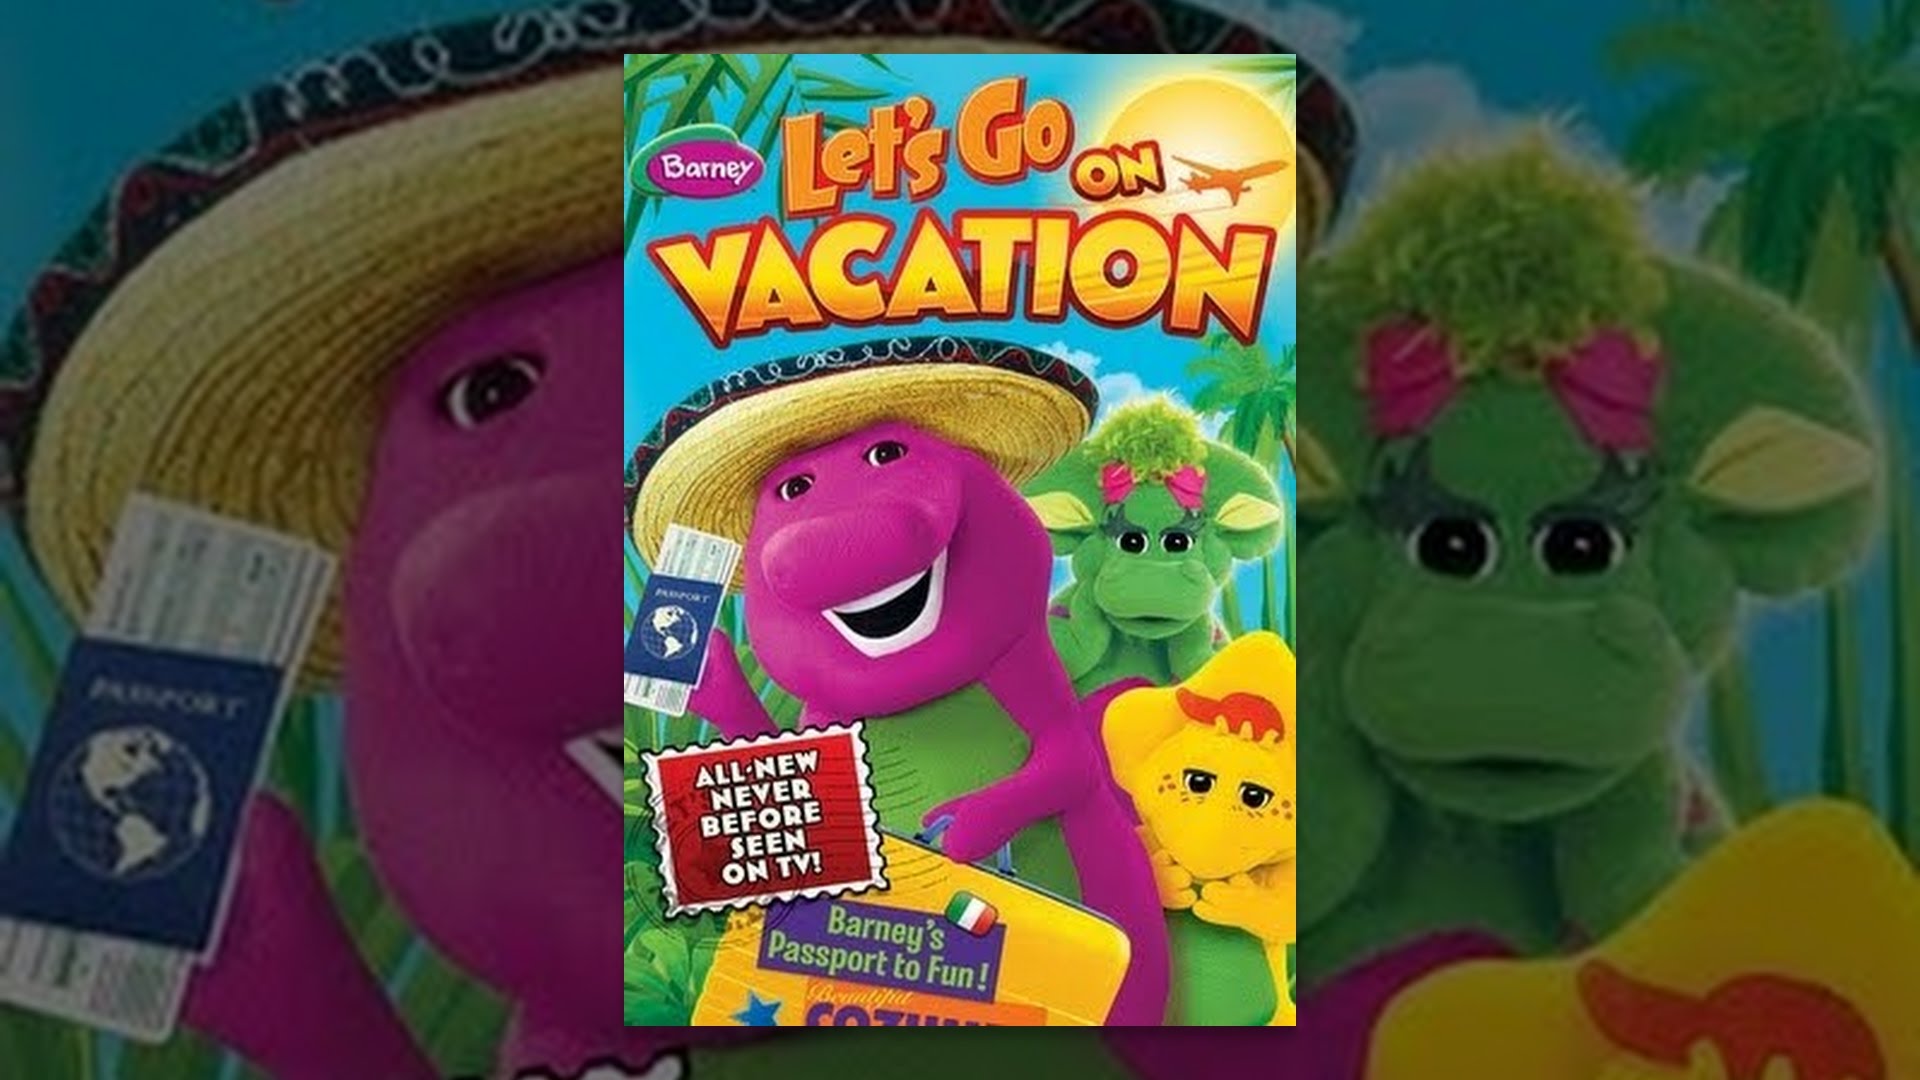 Barney: Let's Go On Vacation.